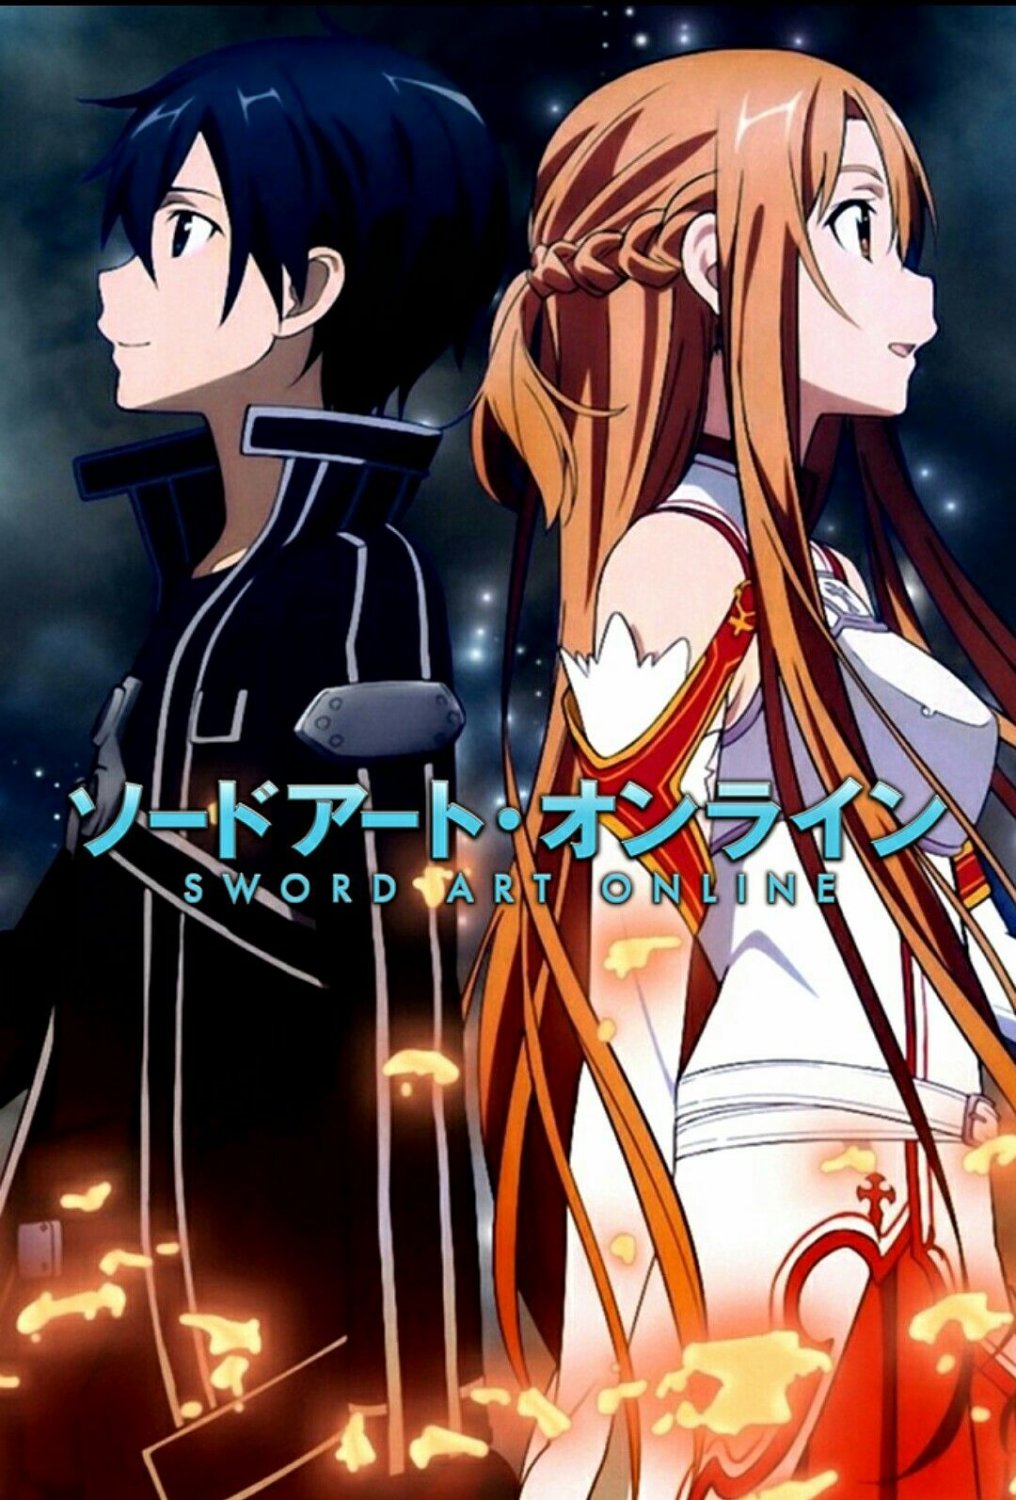 Sword Art Online Style C Poster 13x19 inches